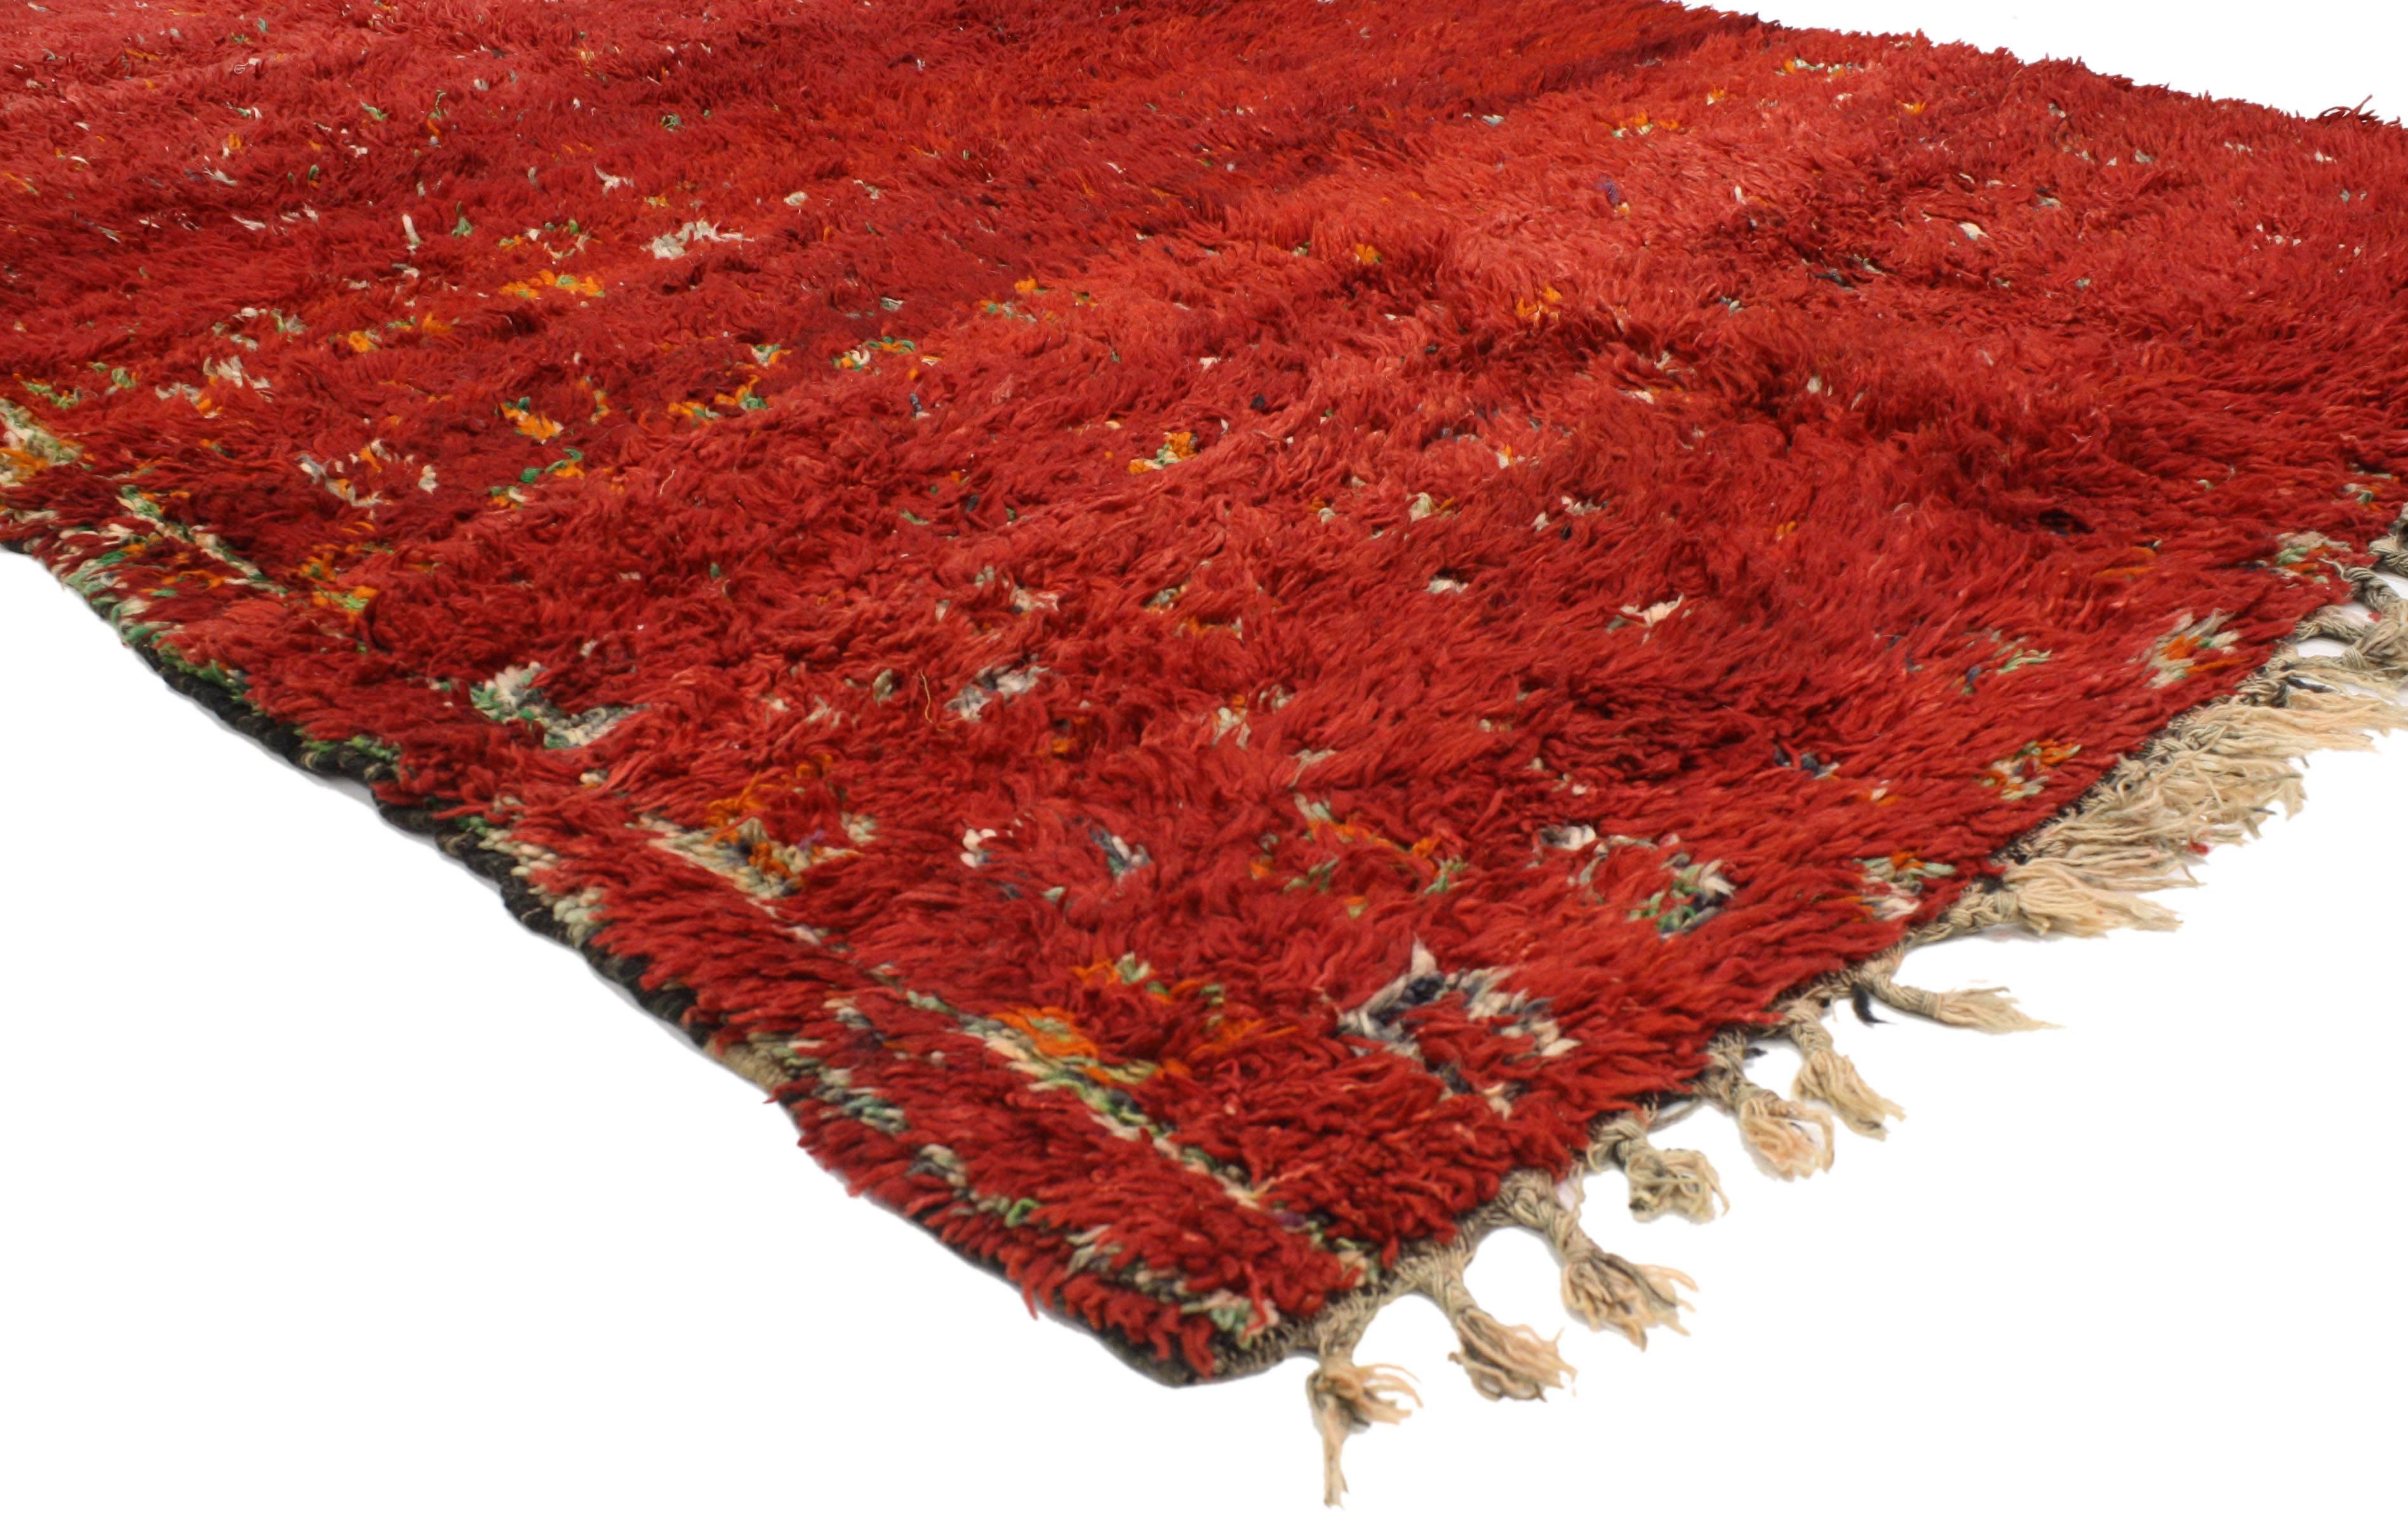 20636, vintage red Moroccan rug with Expressionist style Inspired by Robert Delaunay. This hand knotted wool vintage Berber Moroccan rug features an all-over geometric pattern of square-like motifs spread across the abrashed red field. Though